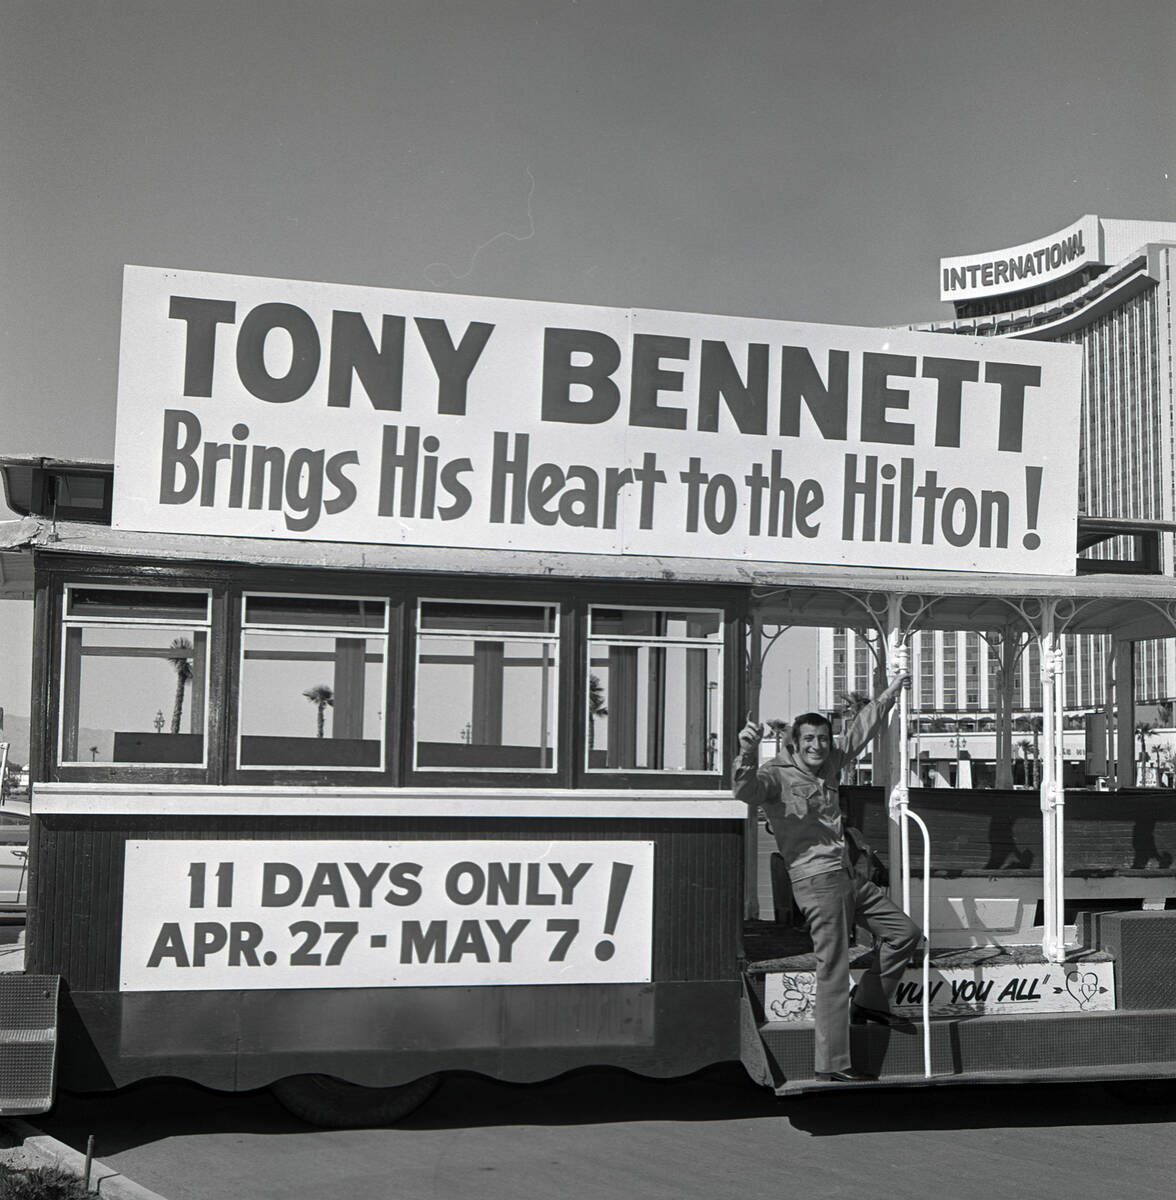 Tony Bennett on a cable car promoting, Tony Bennett Brings His Heart to the Hilton! 11 day only ...